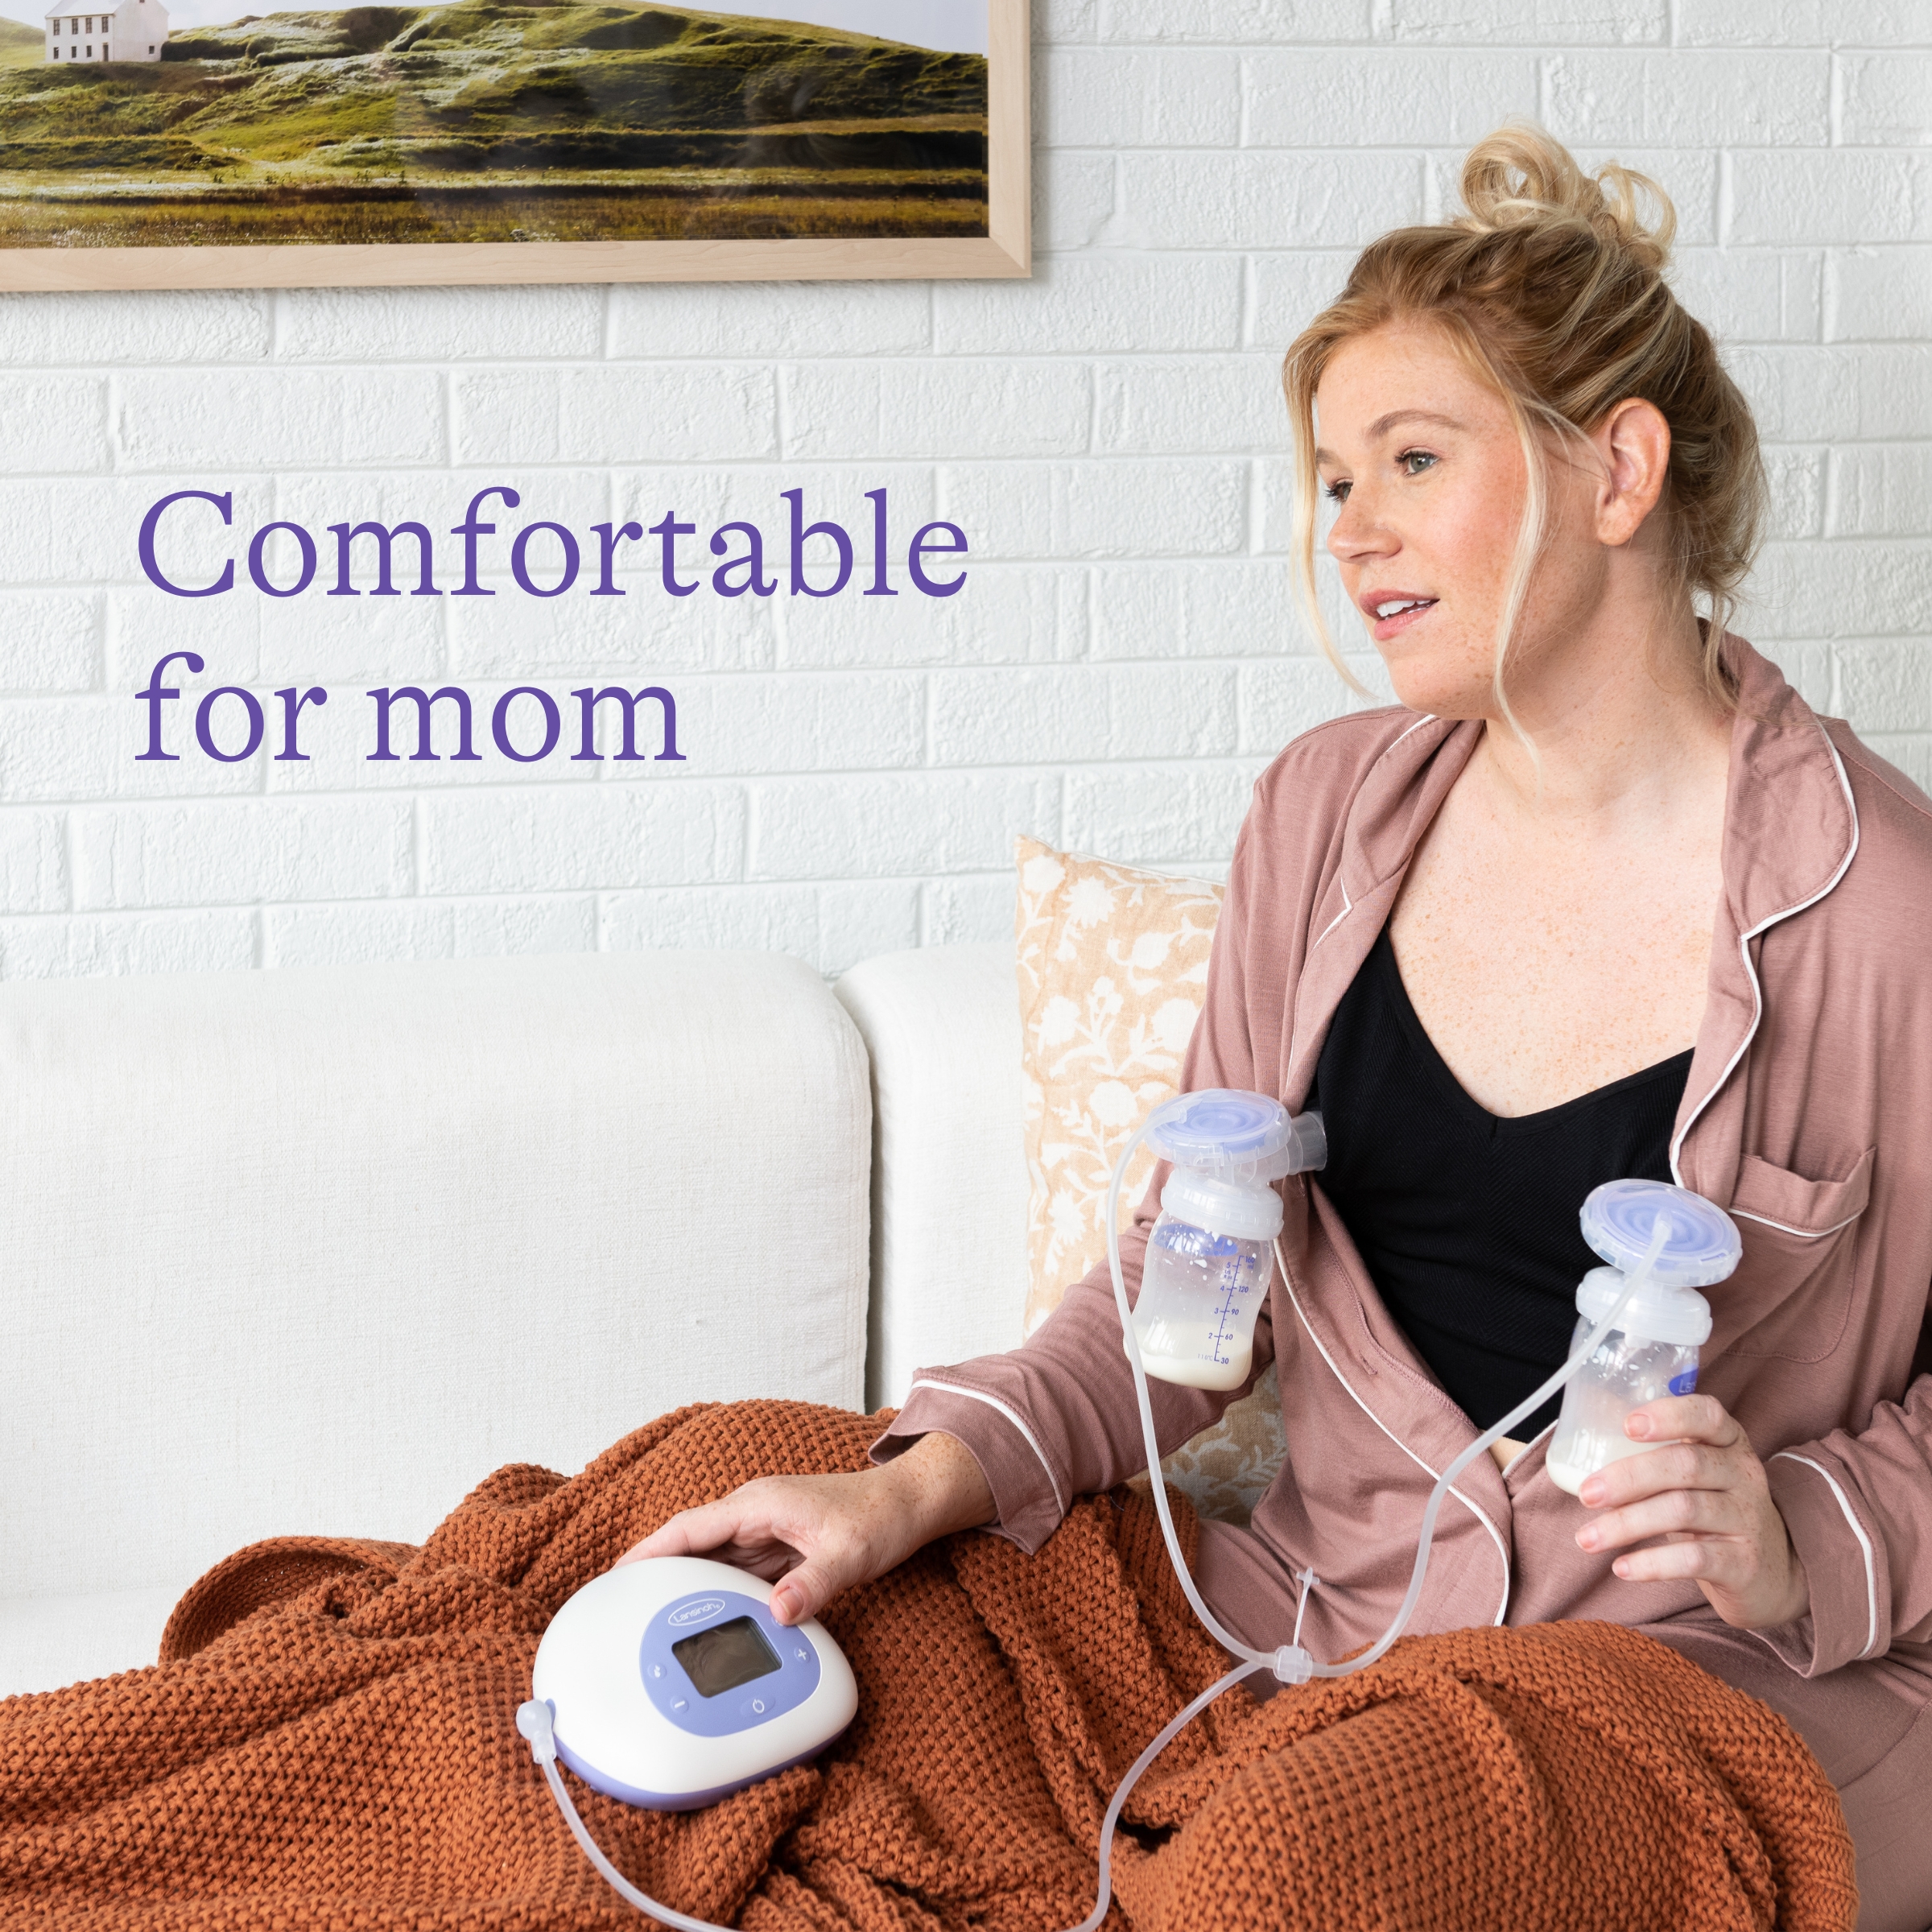 Lansinoh Signature Pro Double Electric Breast Pump - image 3 of 9